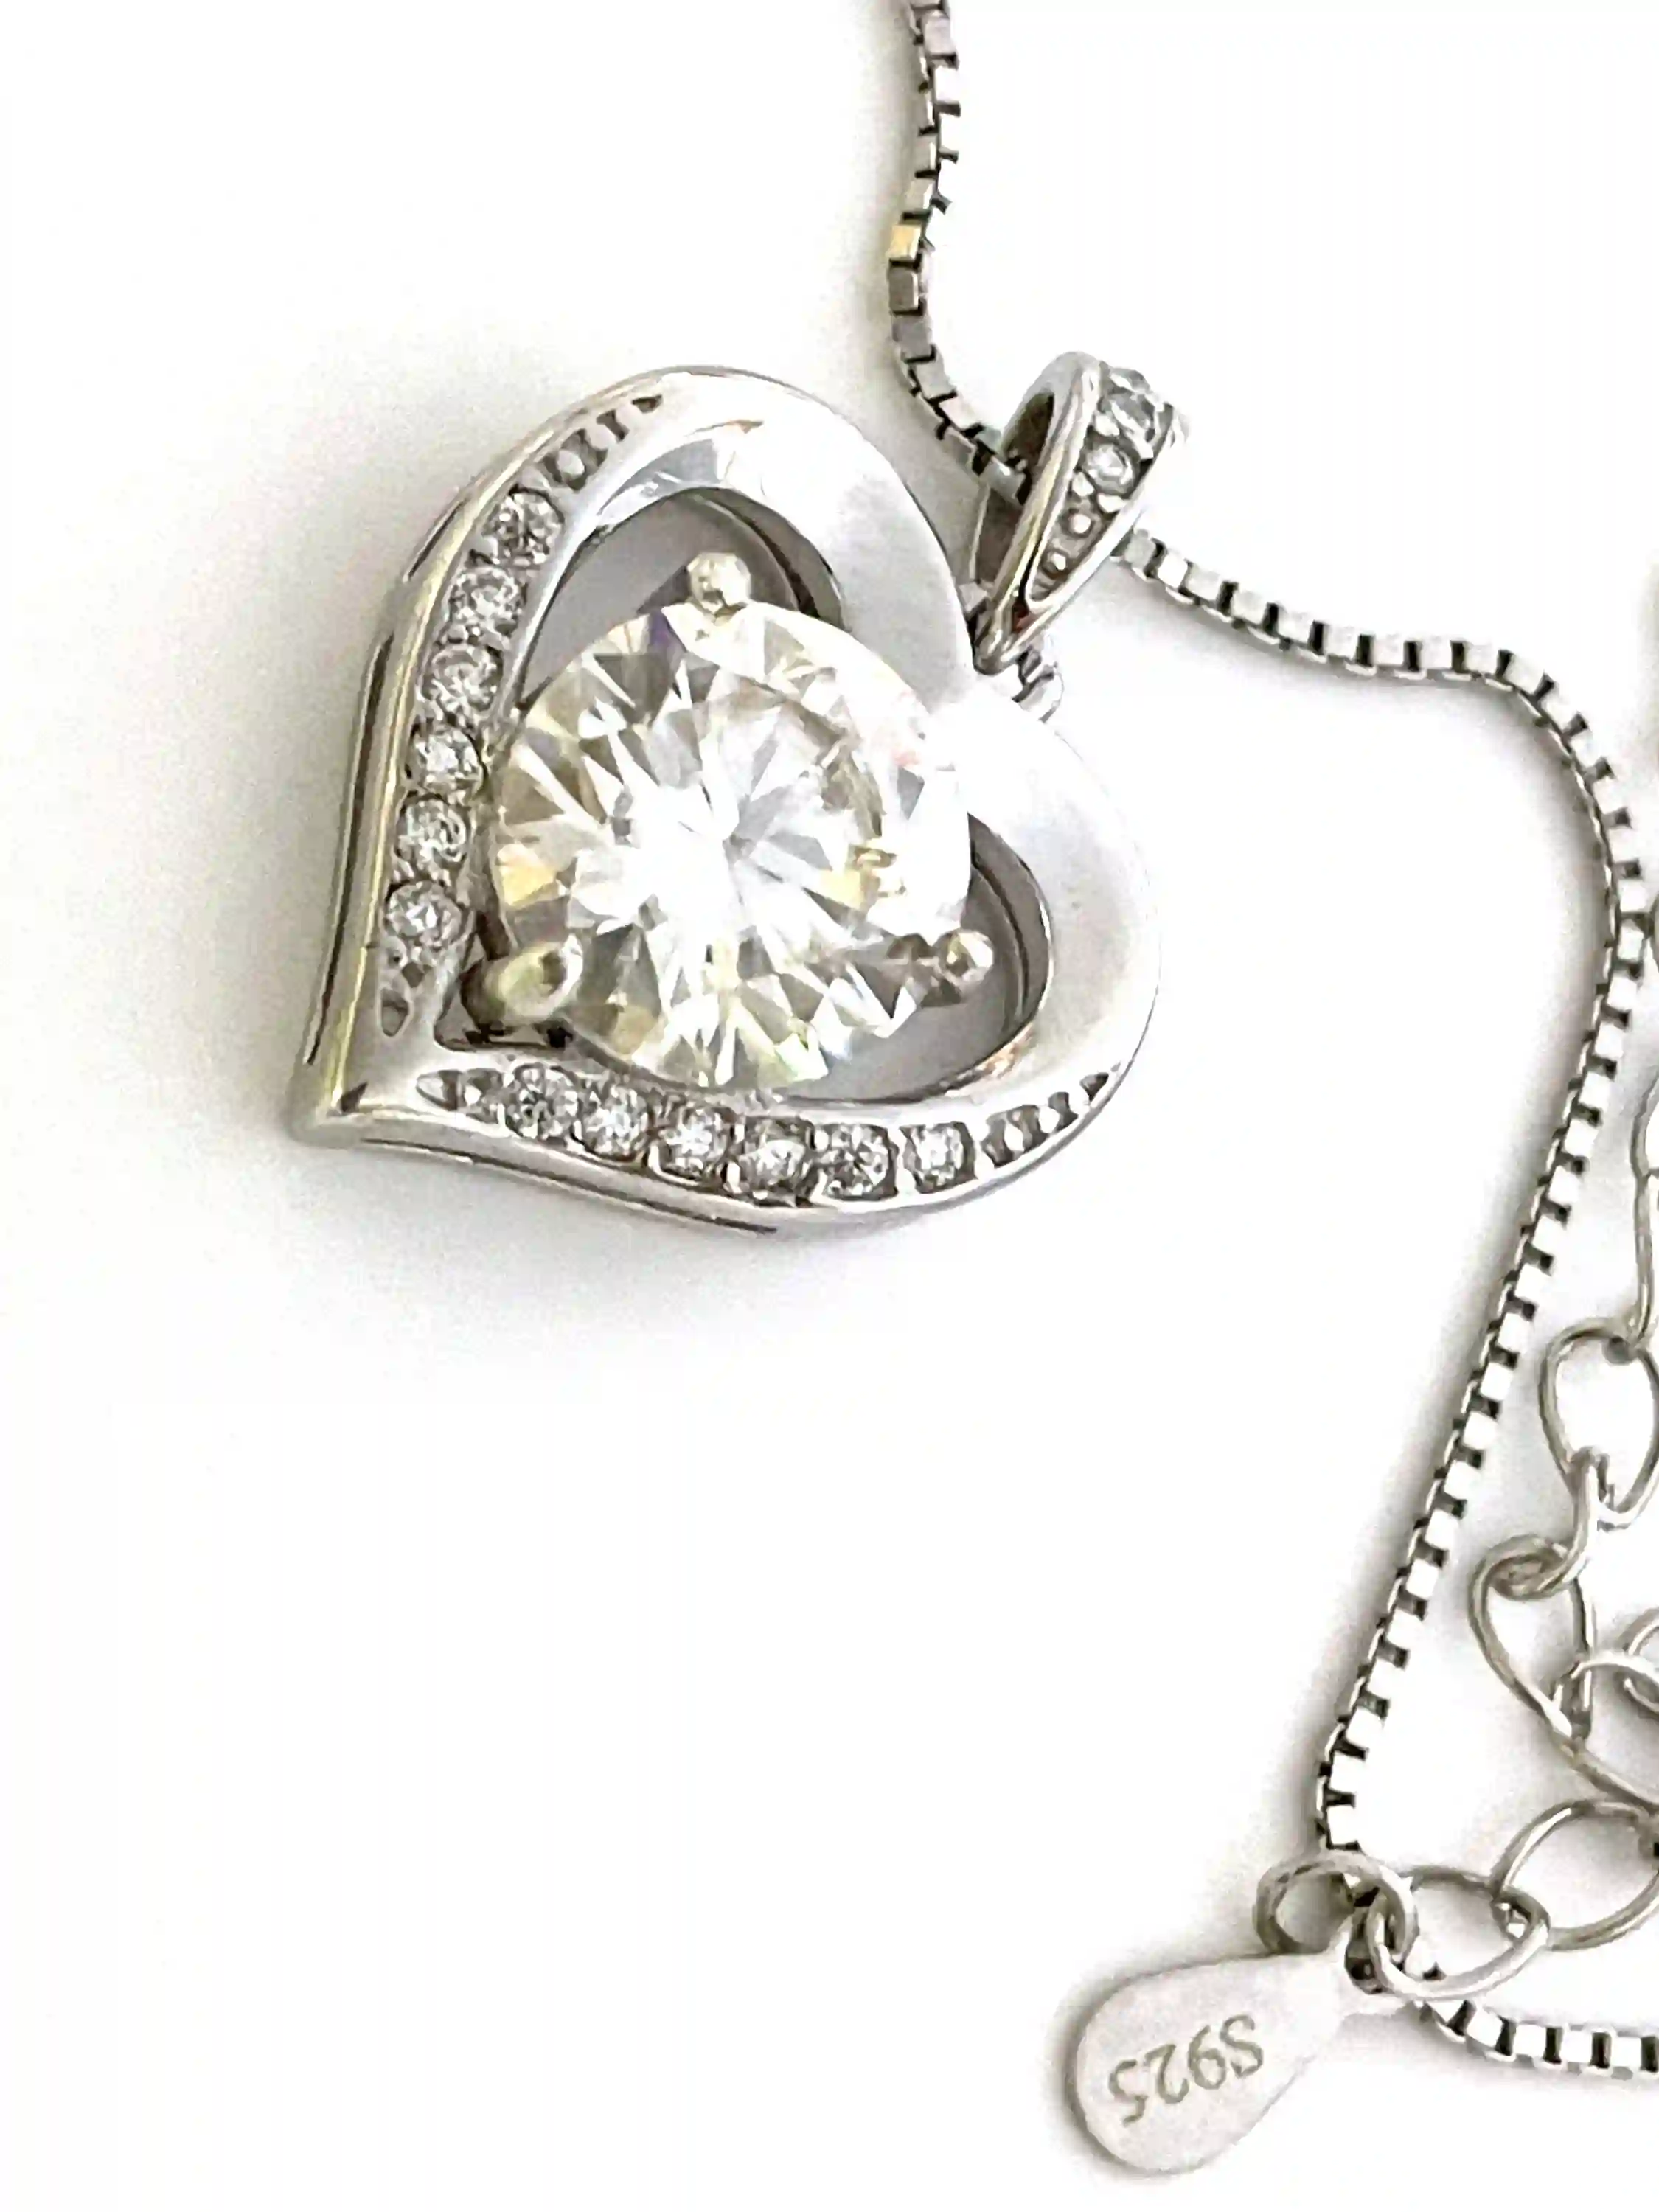 Handmade Diamond Necklace Heart Shaped Pendant Diamond Heart Jewelry Valentines Day gift Fine Jewelry White gold 18k Sterling Silver gifts 